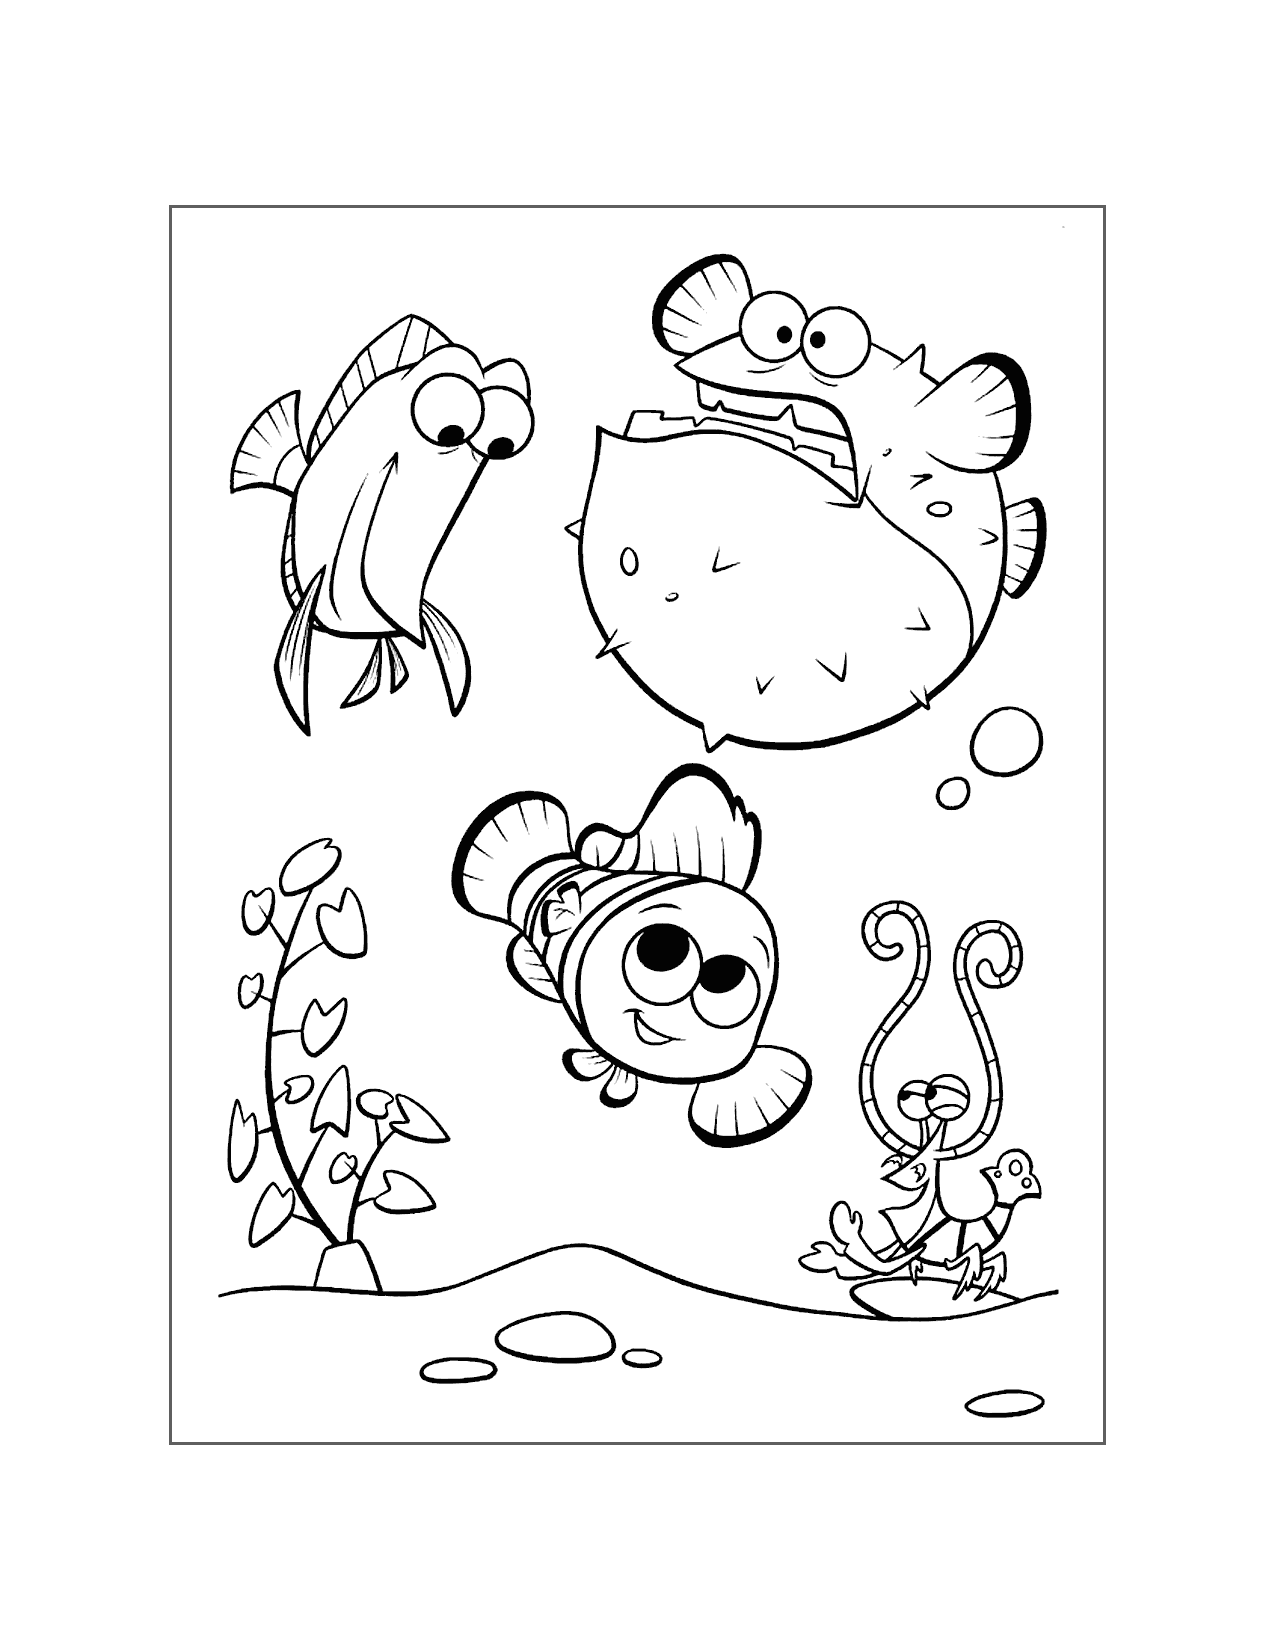 Bloat The Blowfish Finding Nemo Coloring Page